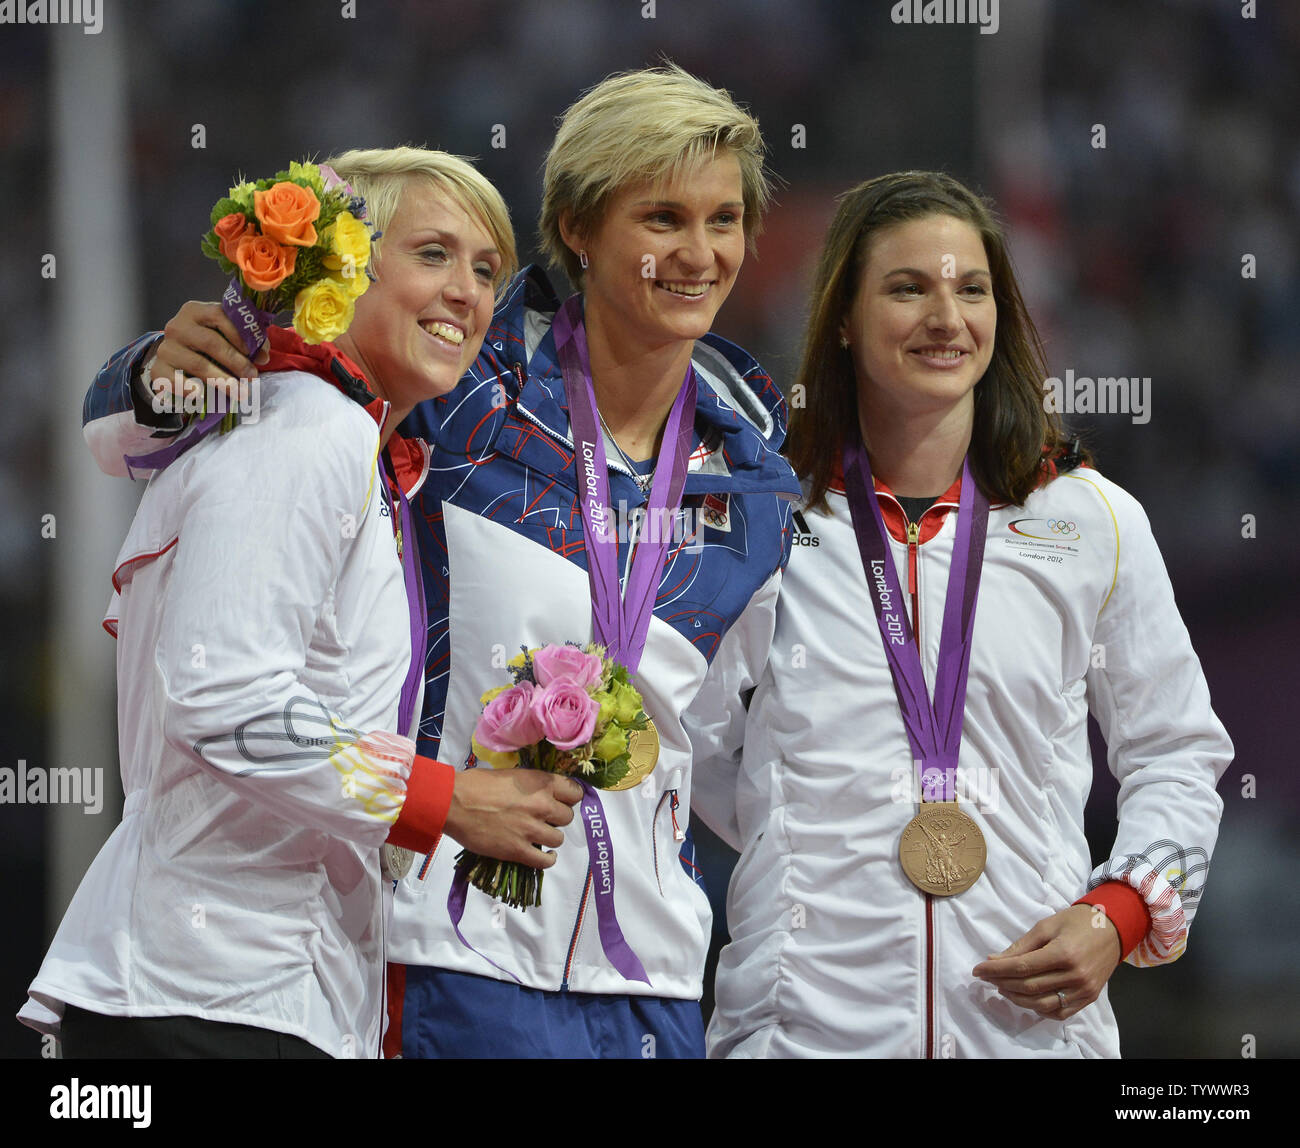 Silver Medalist Christina Obergfoll of Germany, (L-R) Gold Medalist Barbora Spotakova of the Czech Republic and Linda Stahl of Germany laugh during the Victory Ceremony for the Women's Javelin Throw at the London 2012 Summer Olympics on August 10, 2012 in Stratford, London. Spotakova won Gold with a throw of 69.55M while Obergfoll hit a mark of 65.16 and Stahl threw a season-best 64.91 in the final.      UPI/Brian Kersey Stock Photo